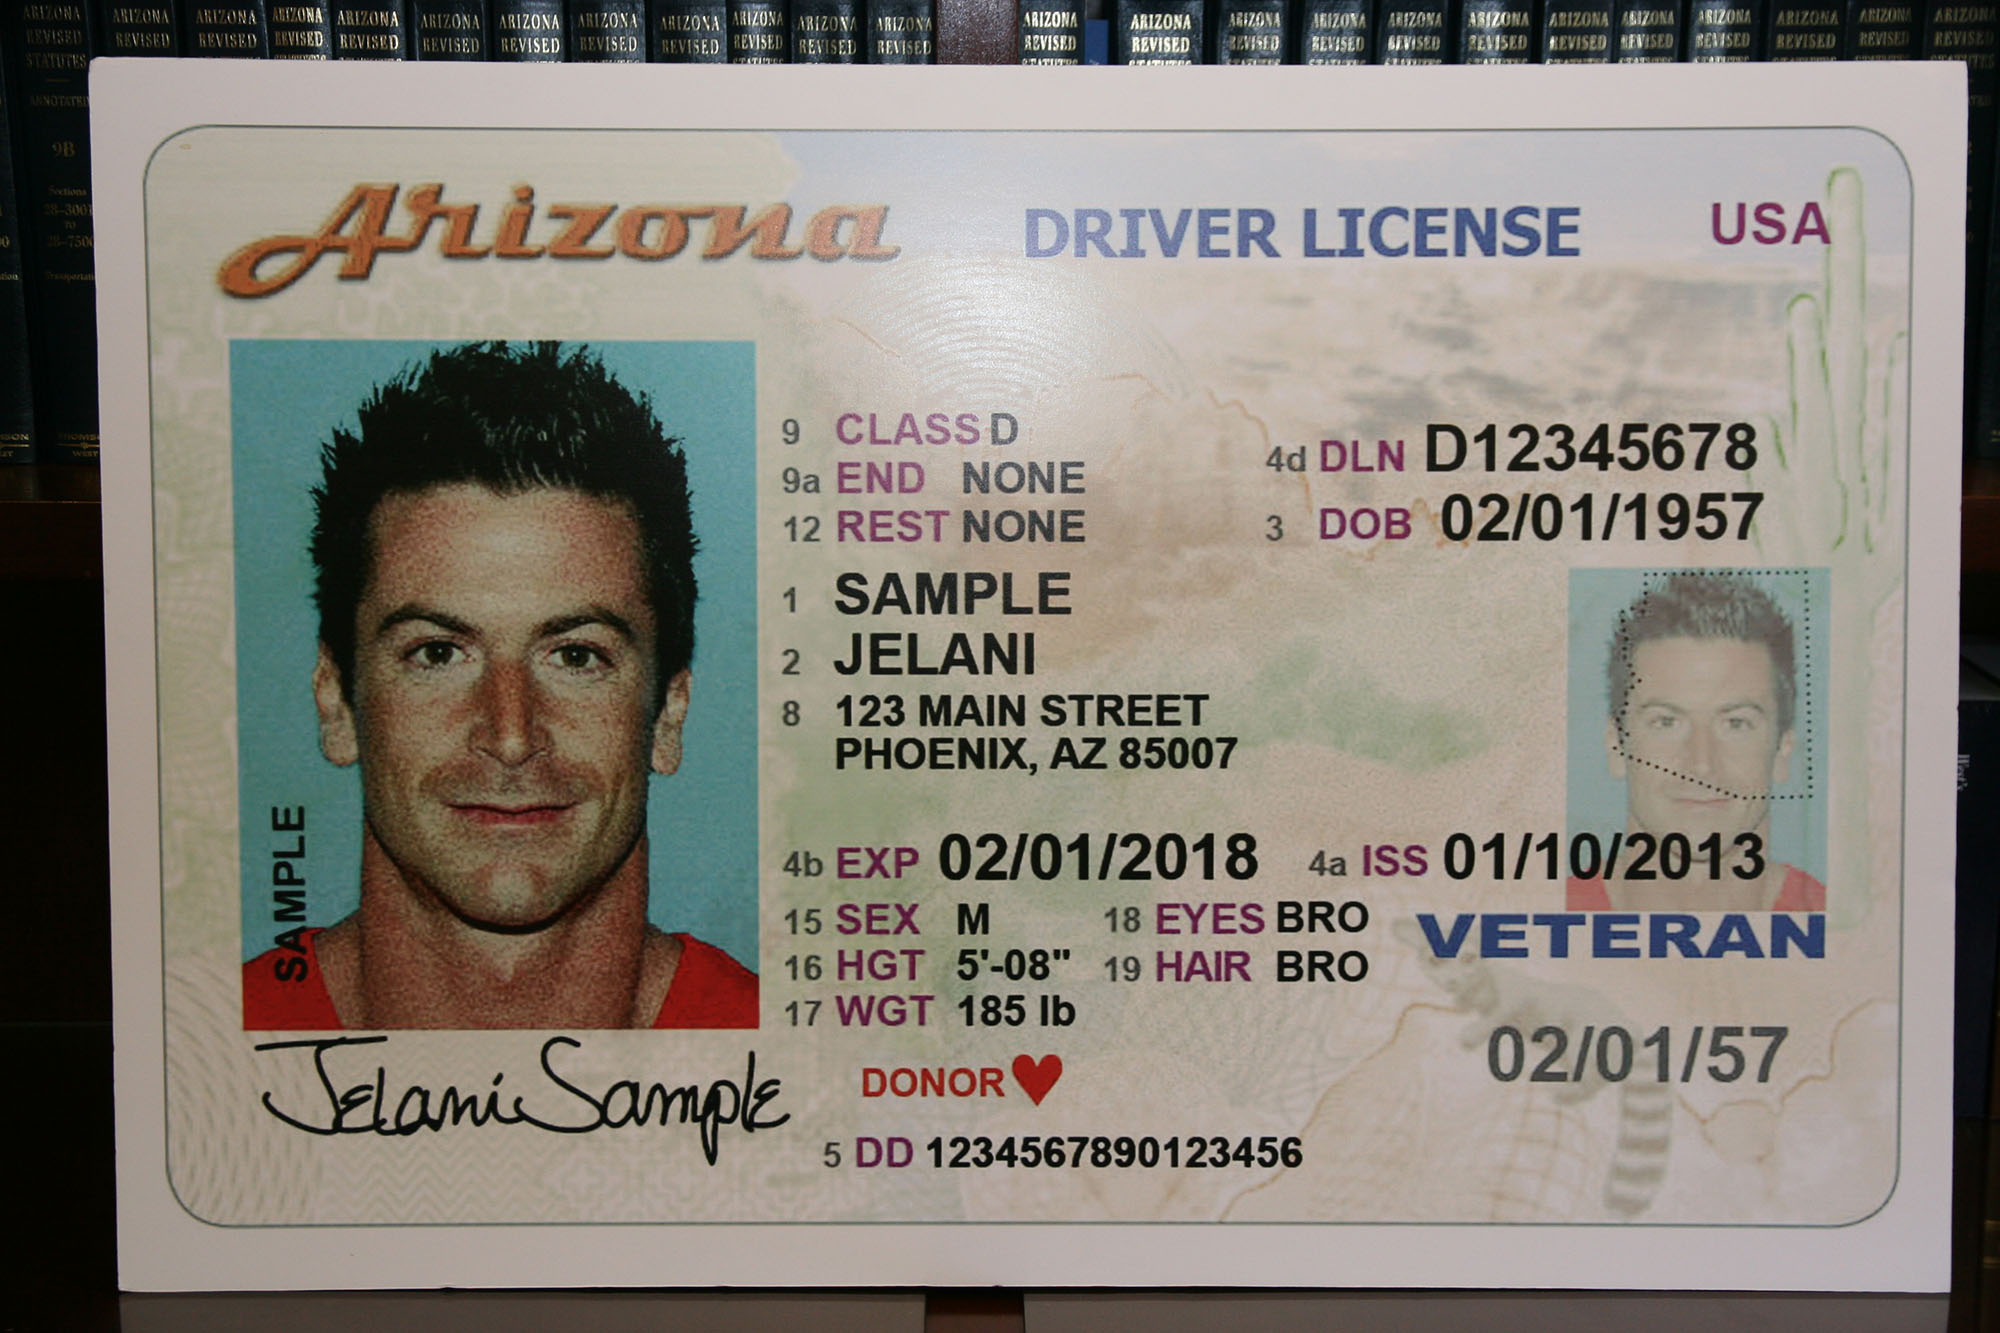 First fallout nears for Arizona’s refusal to comply with Real ID Act